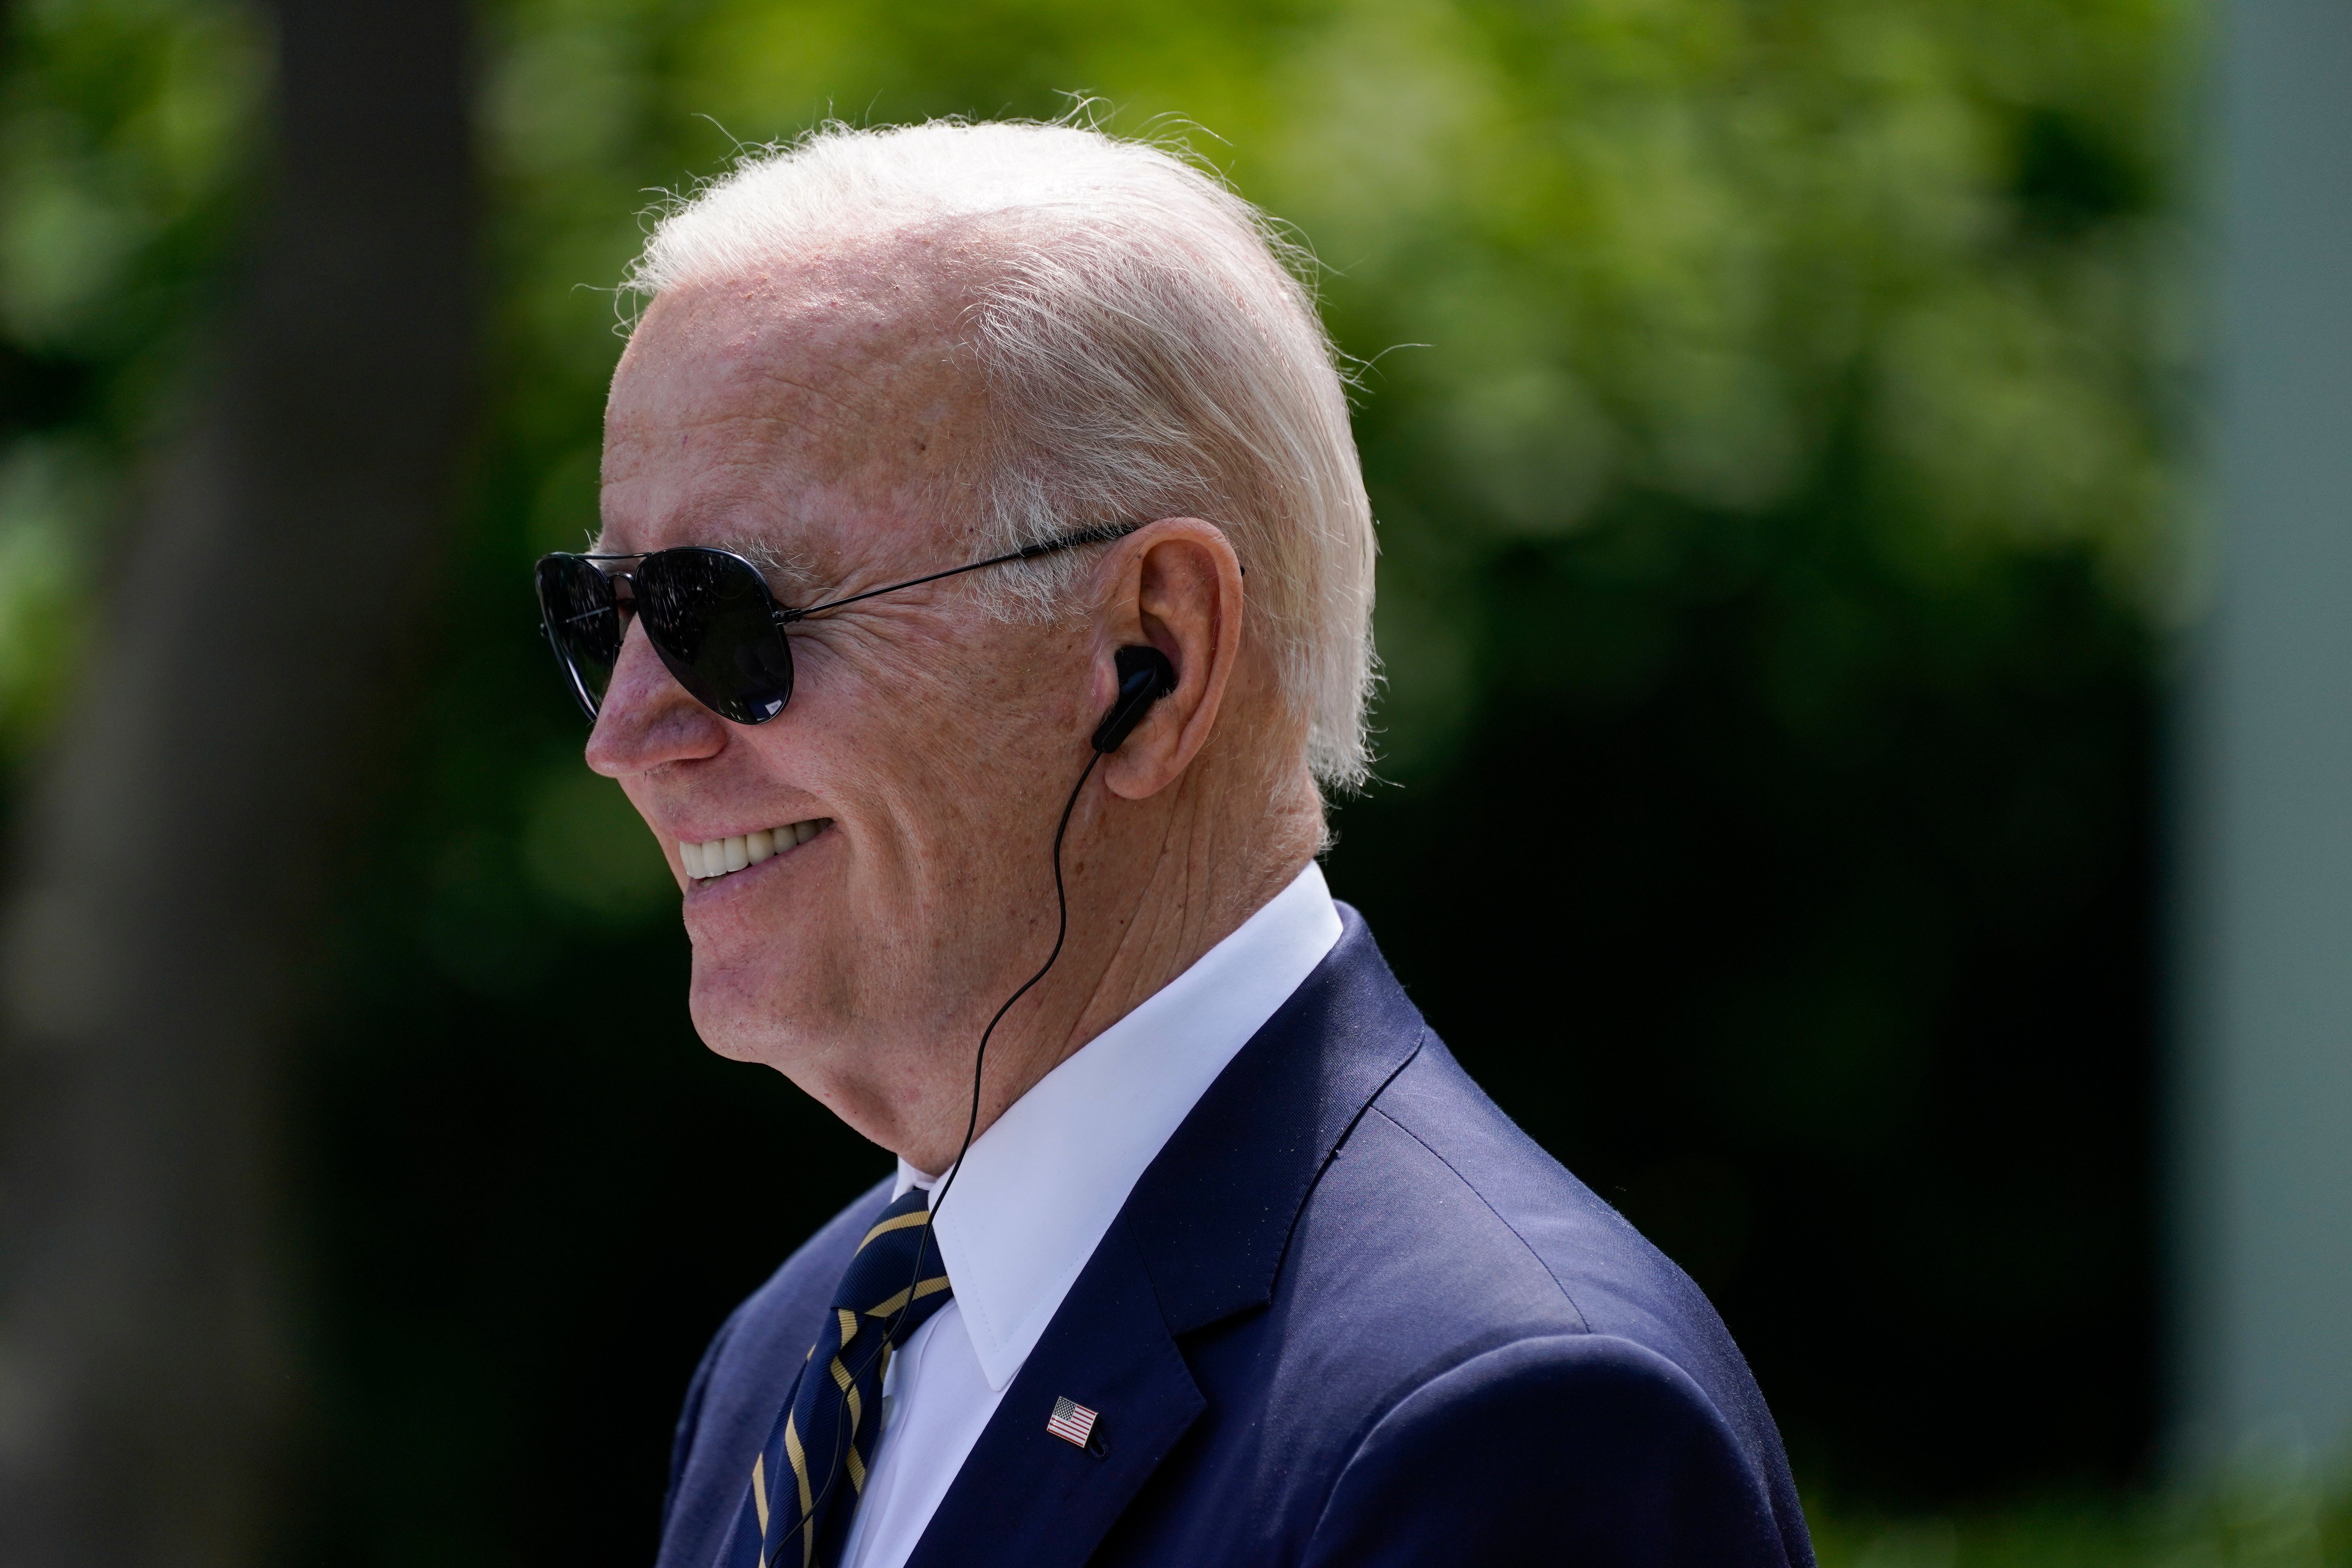 President Joe Biden smiles during a news conference with South Korea's President Yoon Suk Yeol in the Rose Garden of the White House on Wednesday, April 26, 2023, in Washington. (AP Photo/Evan Vucci)